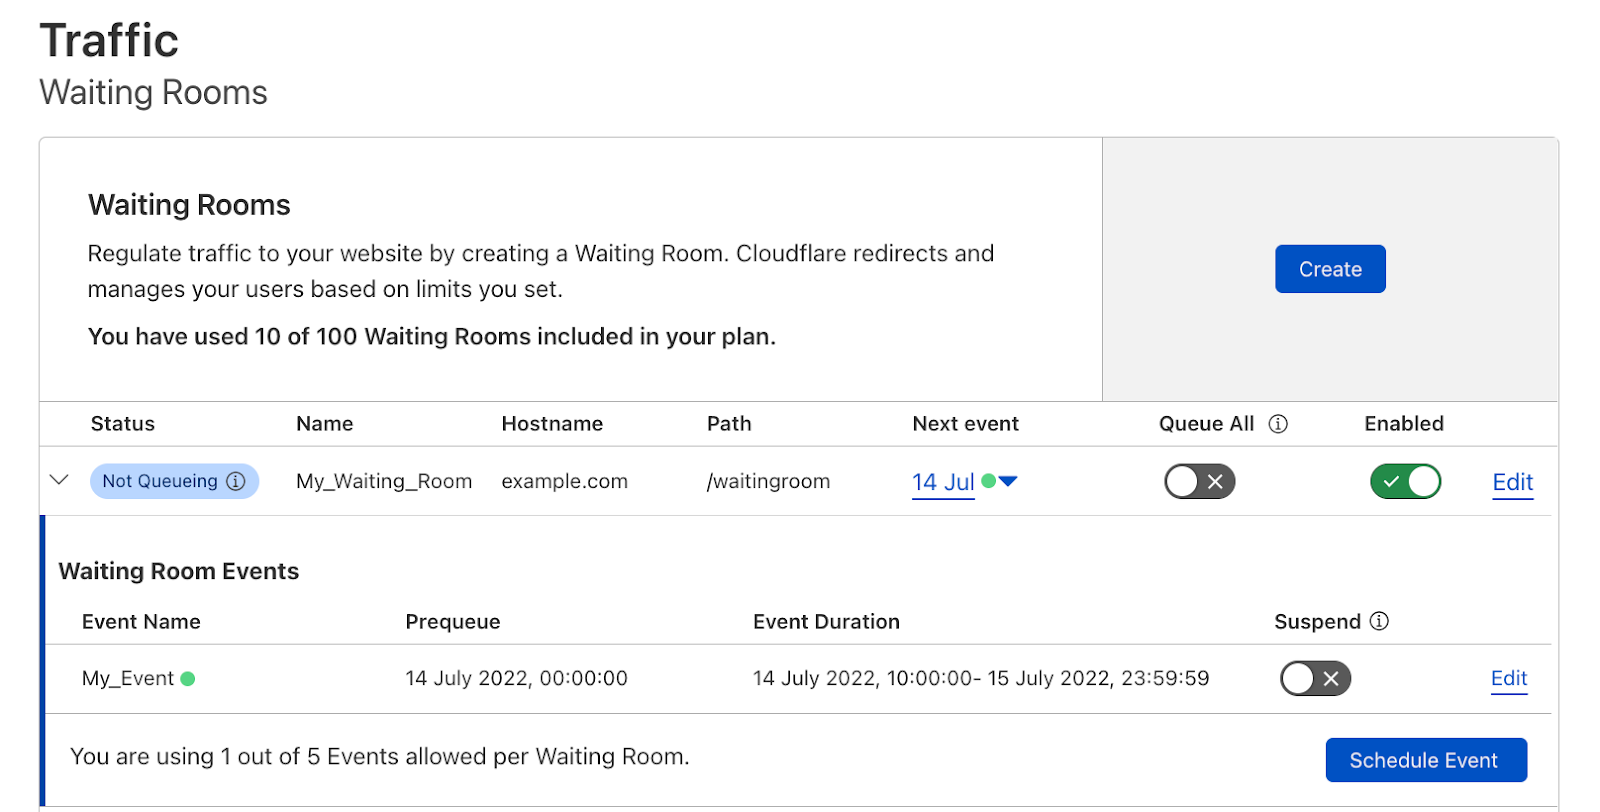 From the Waiting Room dashboard, easily discern which waiting rooms have upcoming or live events.